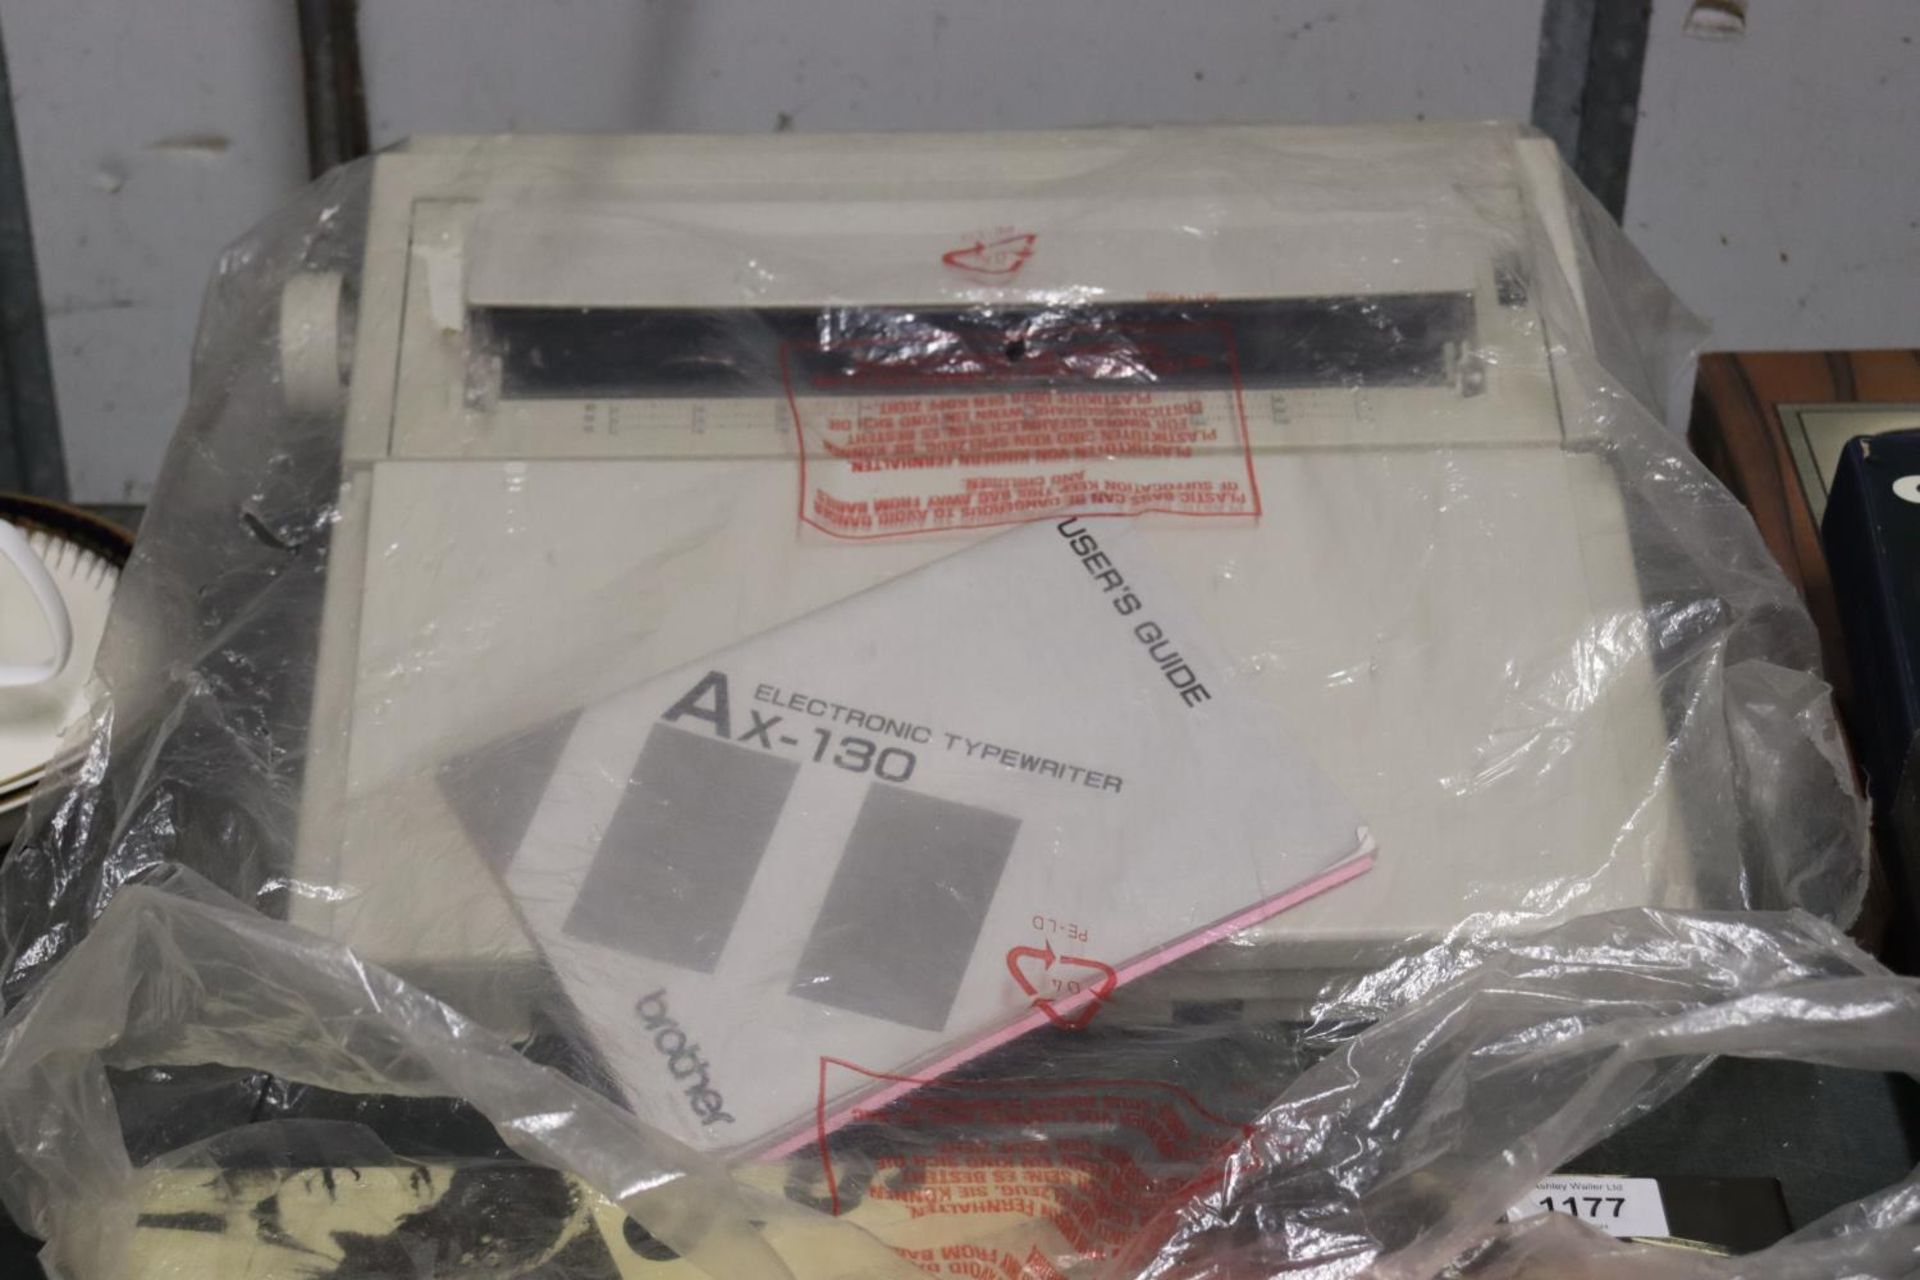 A BROTHER AX-130 ELECTRIC TYPEWRITER AND USER'S GUIDE